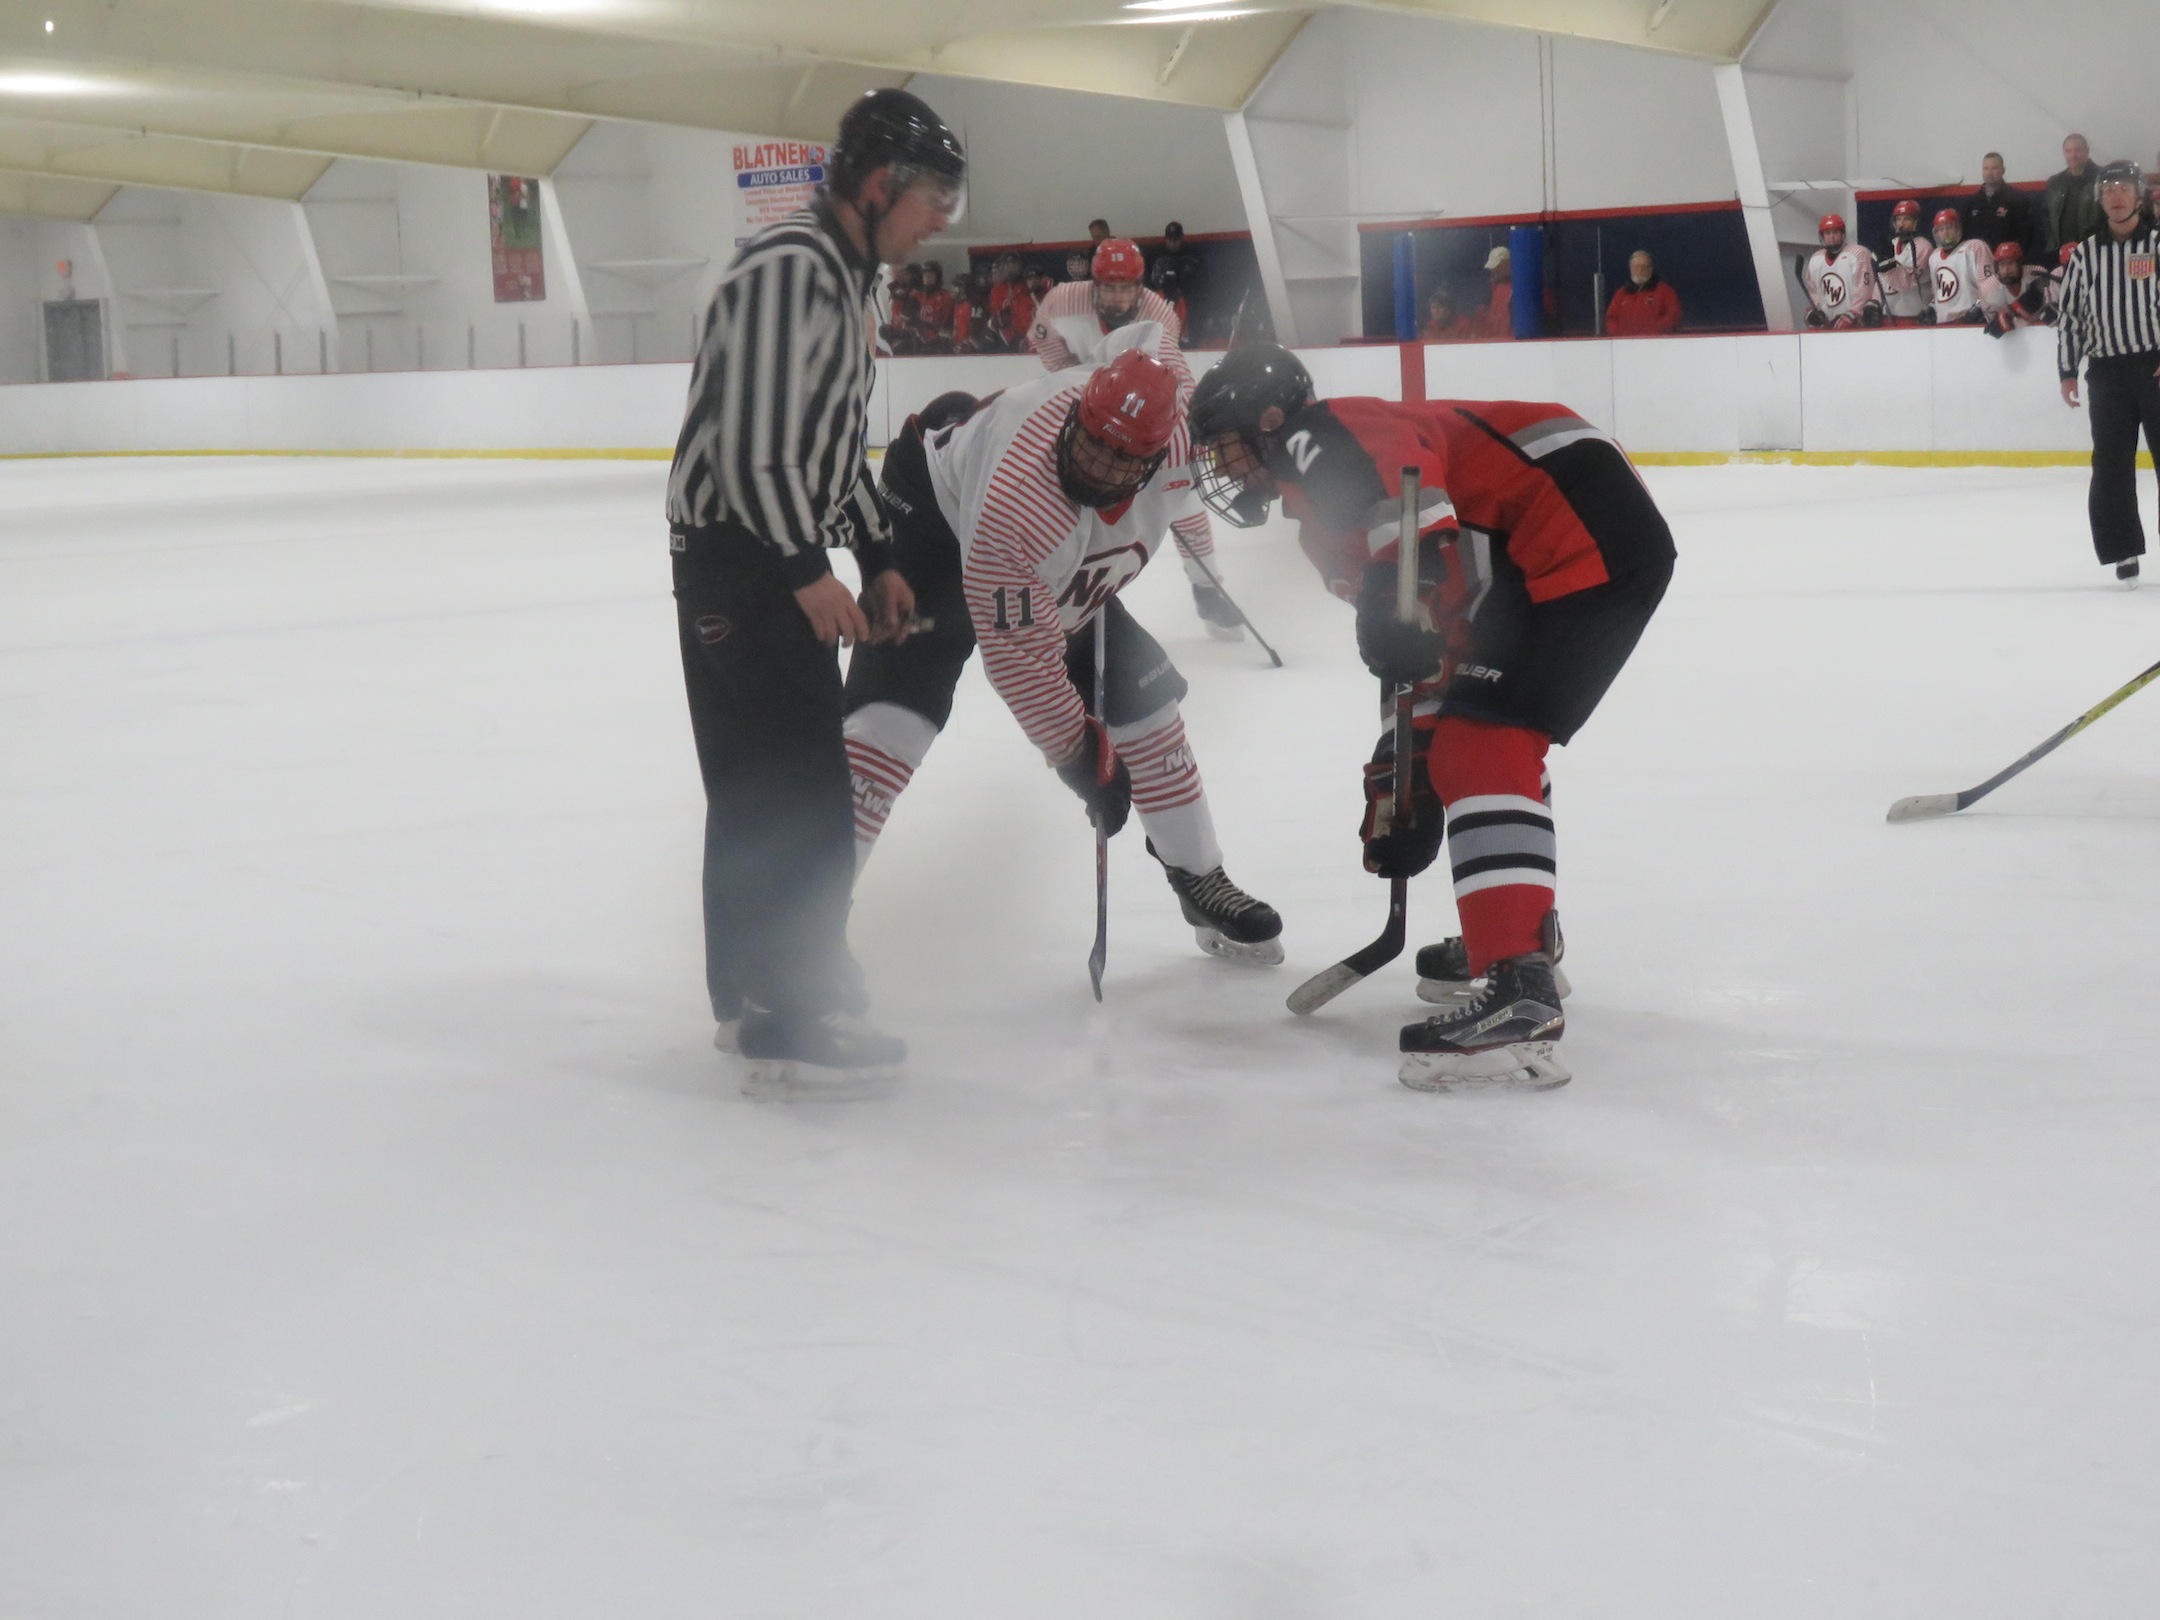 Chace Woods duels for a faceoff with Clarence's Noah Corry at Tuesday's Division 1 contest at the Hockey Outlet. (Photo by David Yarger)